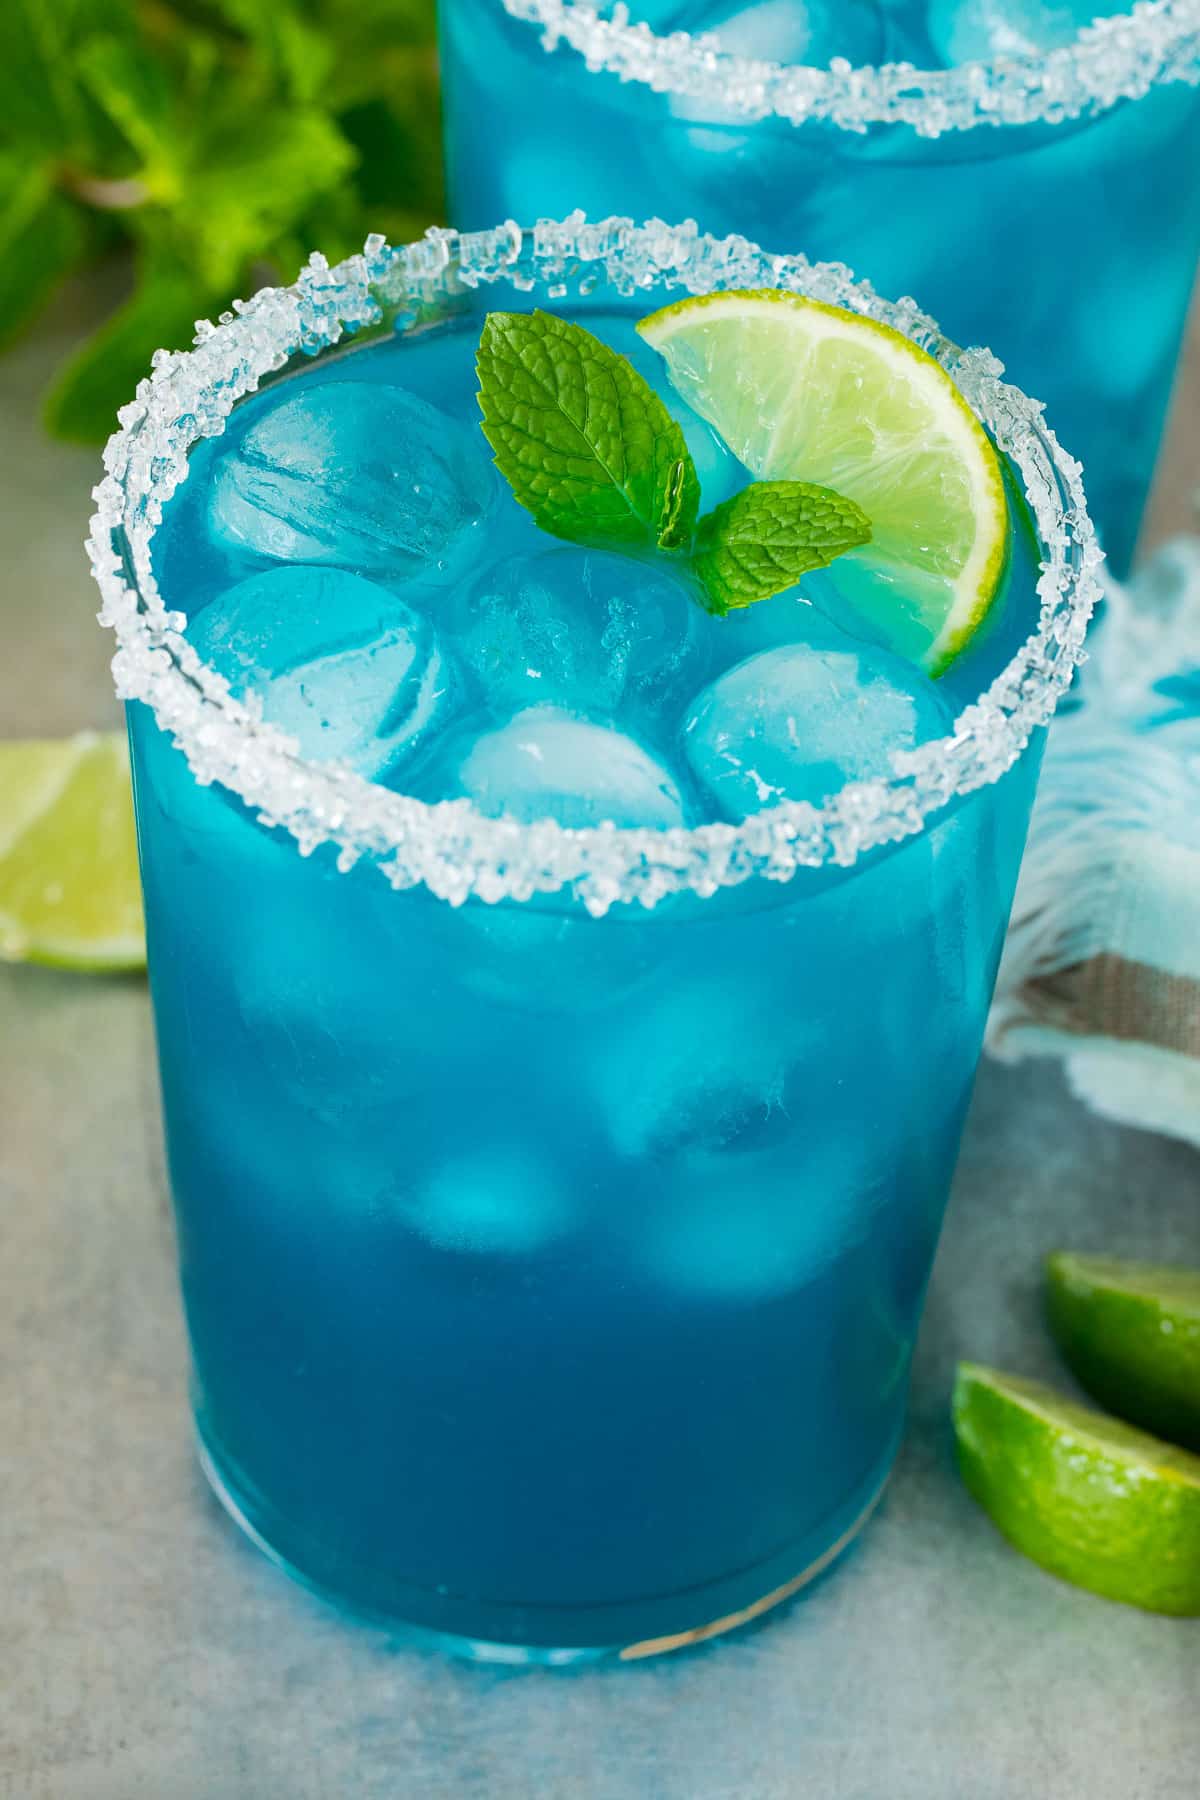 A glass of blue margarita with a garnish of mint and lime slices.